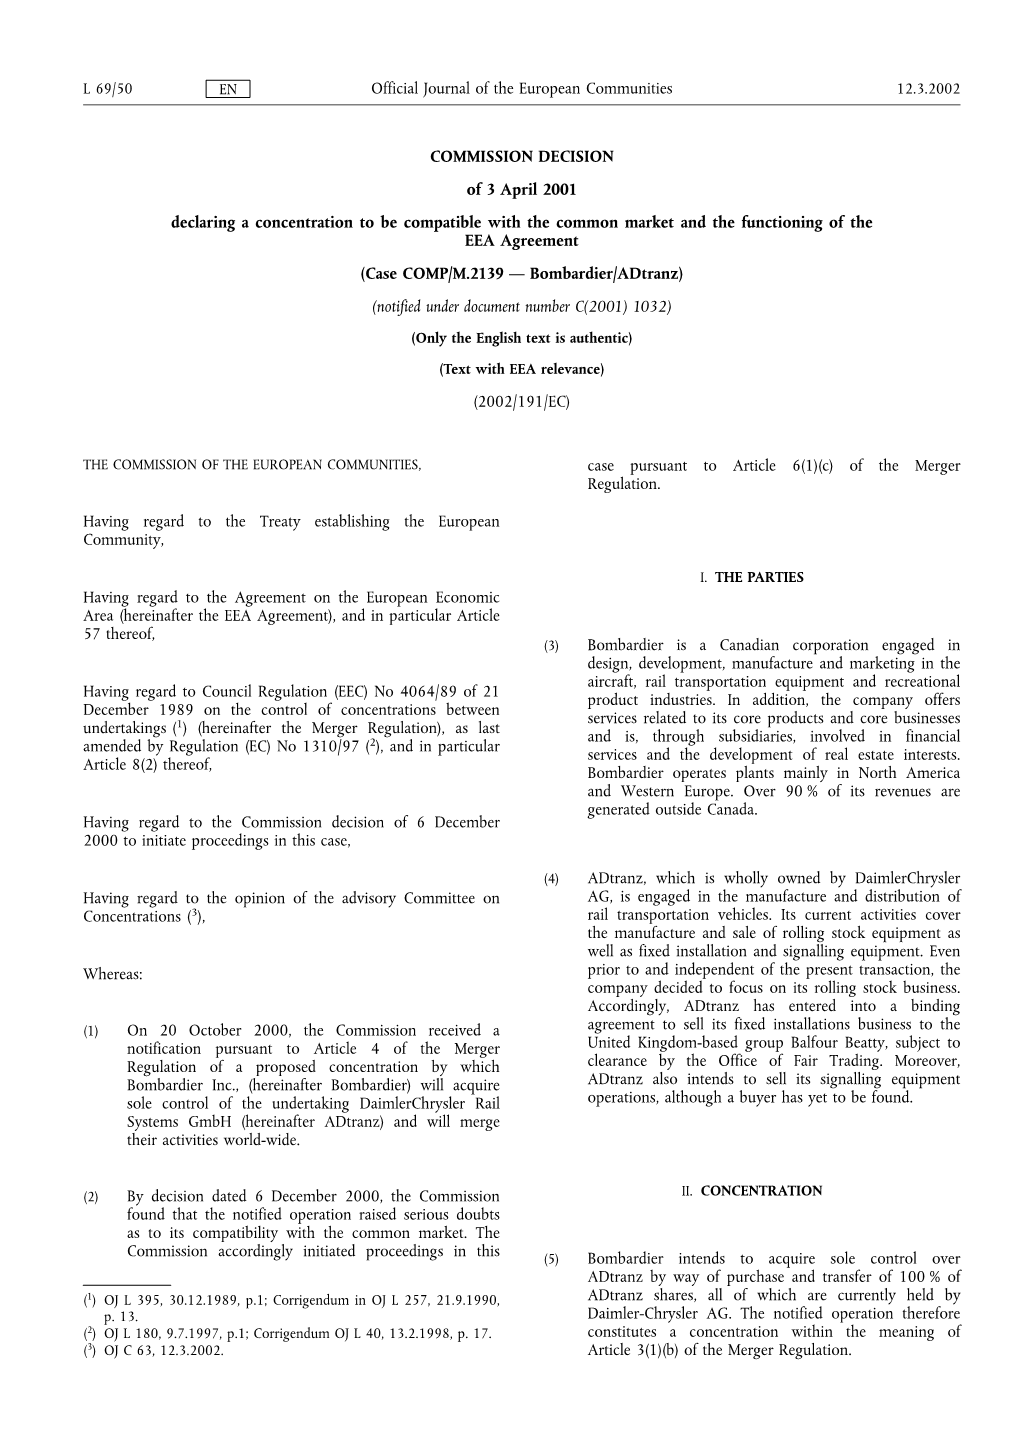 COMMISSION DECISION of 3 April 2001 Declaring a Concentration To